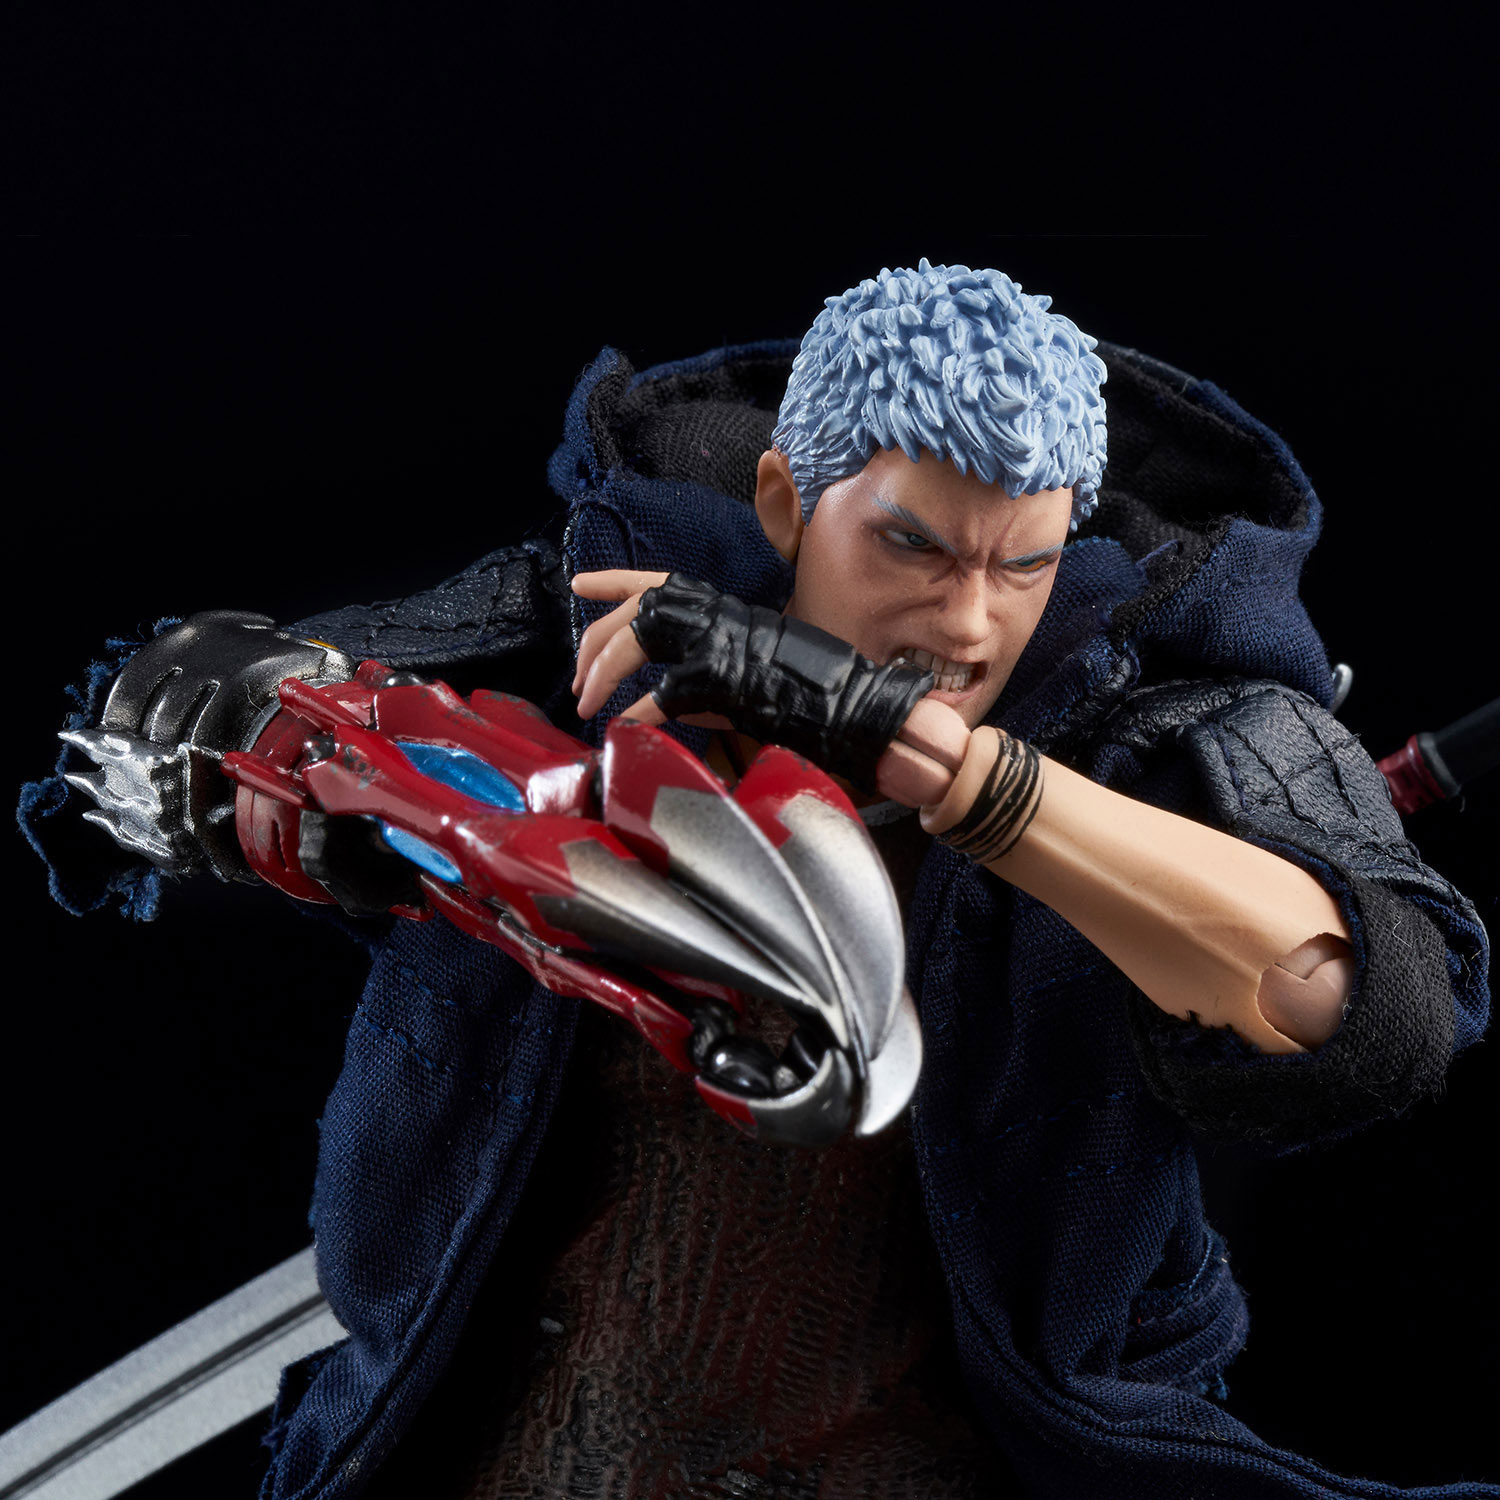 DEVIL MAY CRY 5 Dante 1/12 Action Figure for sale online